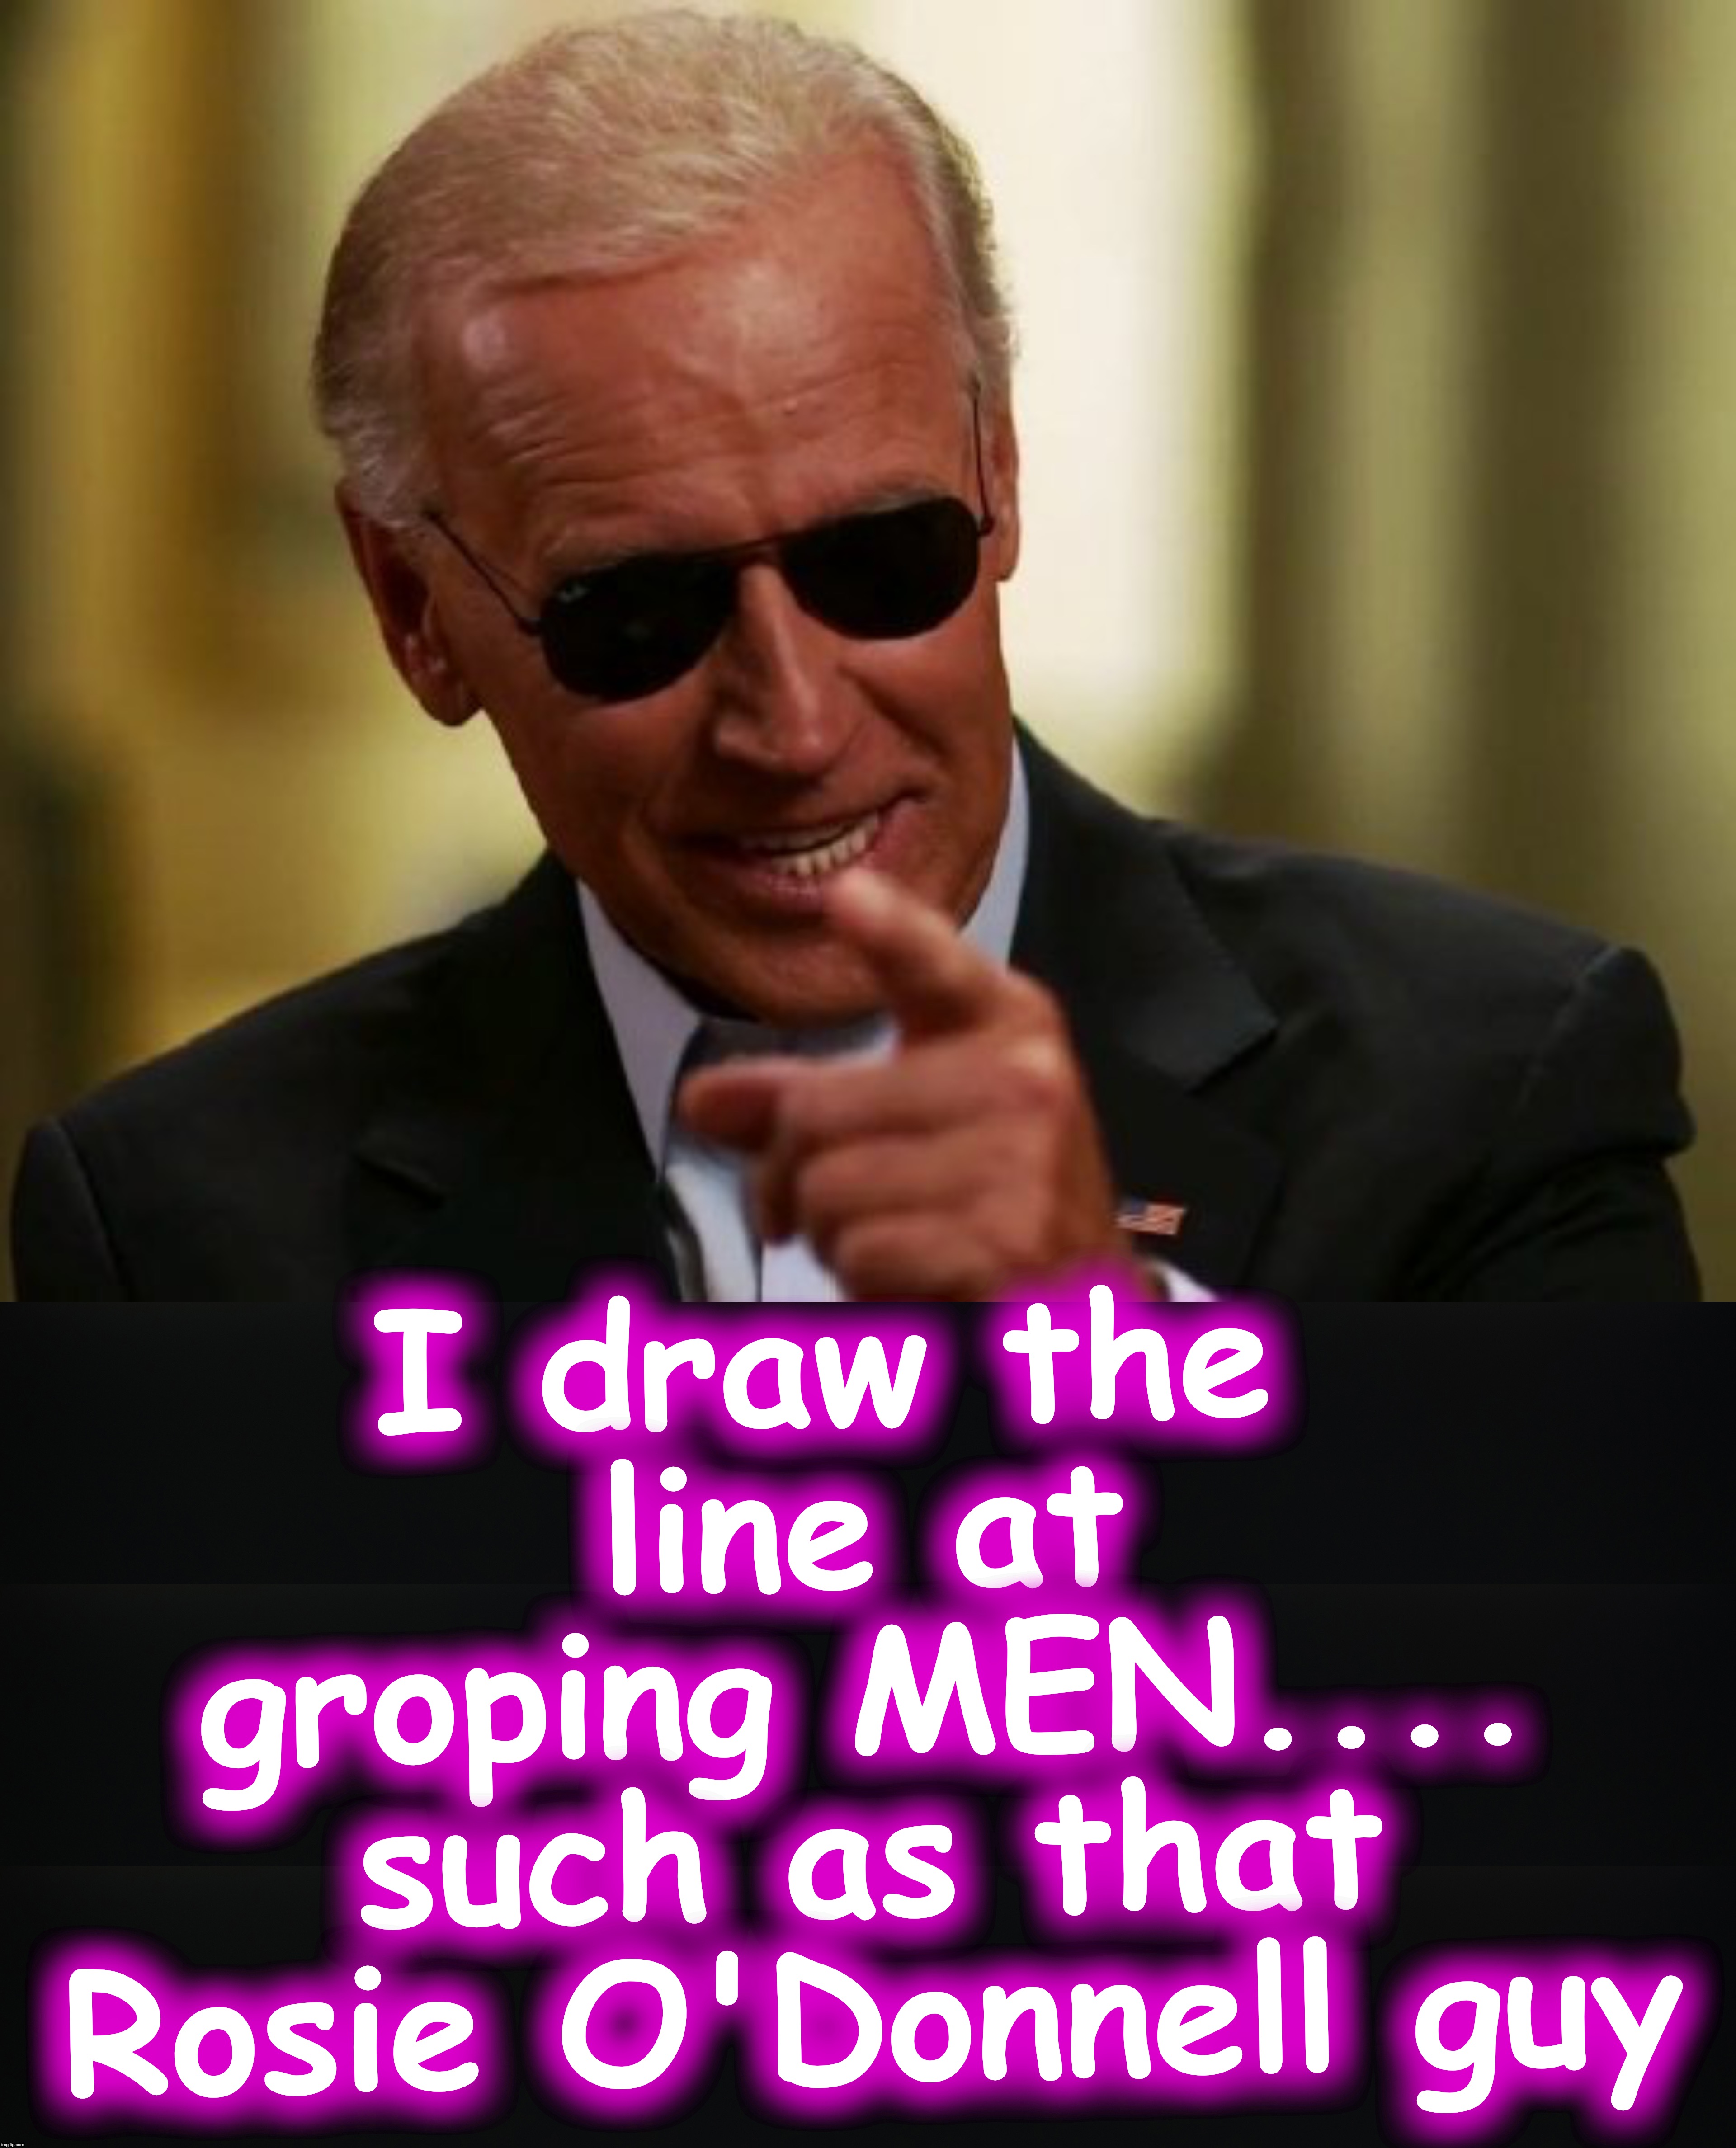 I draw the line at groping MEN.... such as that Rosie O'Donnell guy | image tagged in biden,rosie o'donnell | made w/ Imgflip meme maker